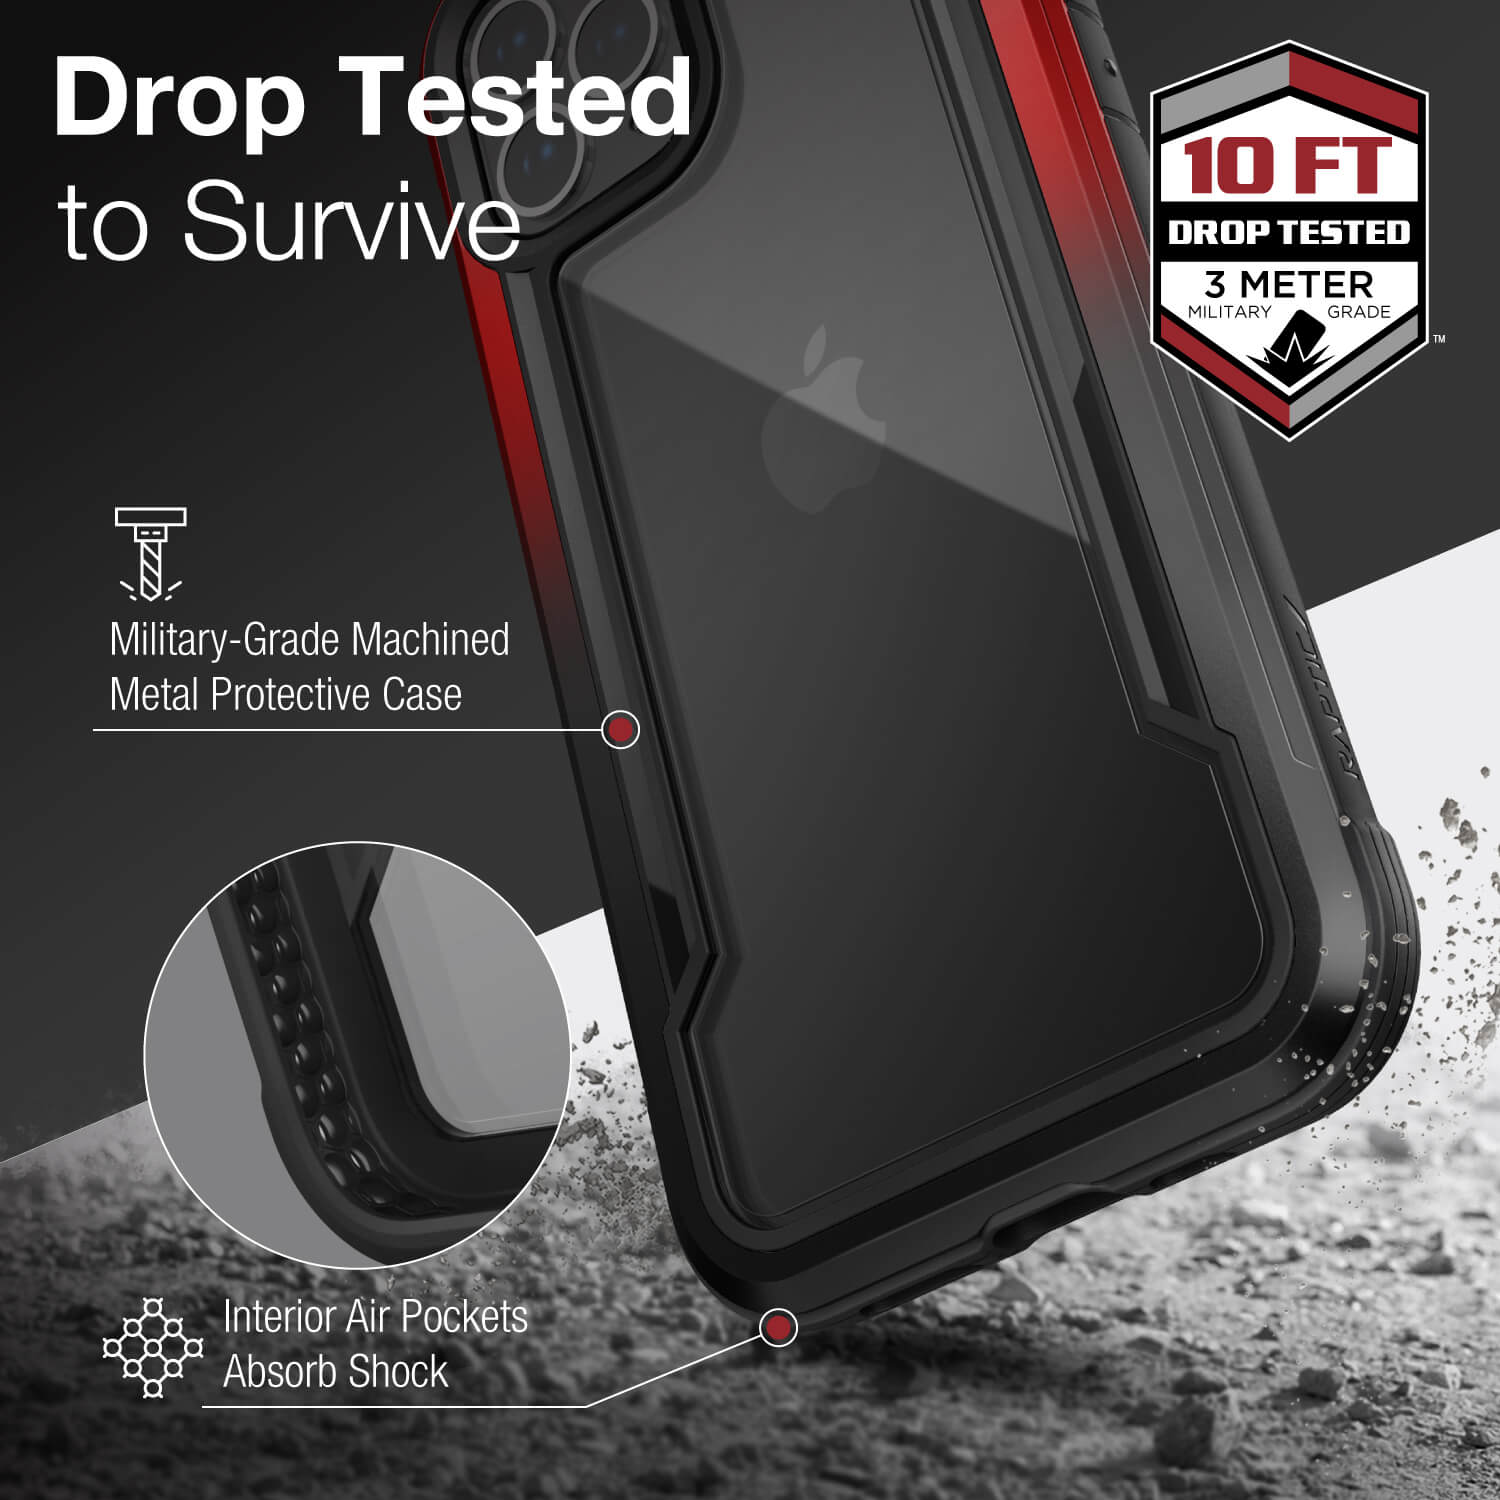 Infographic showing an iPhone 12 in a Black Red Gradient Raptic Shield Case with drop protection certification up to three metres